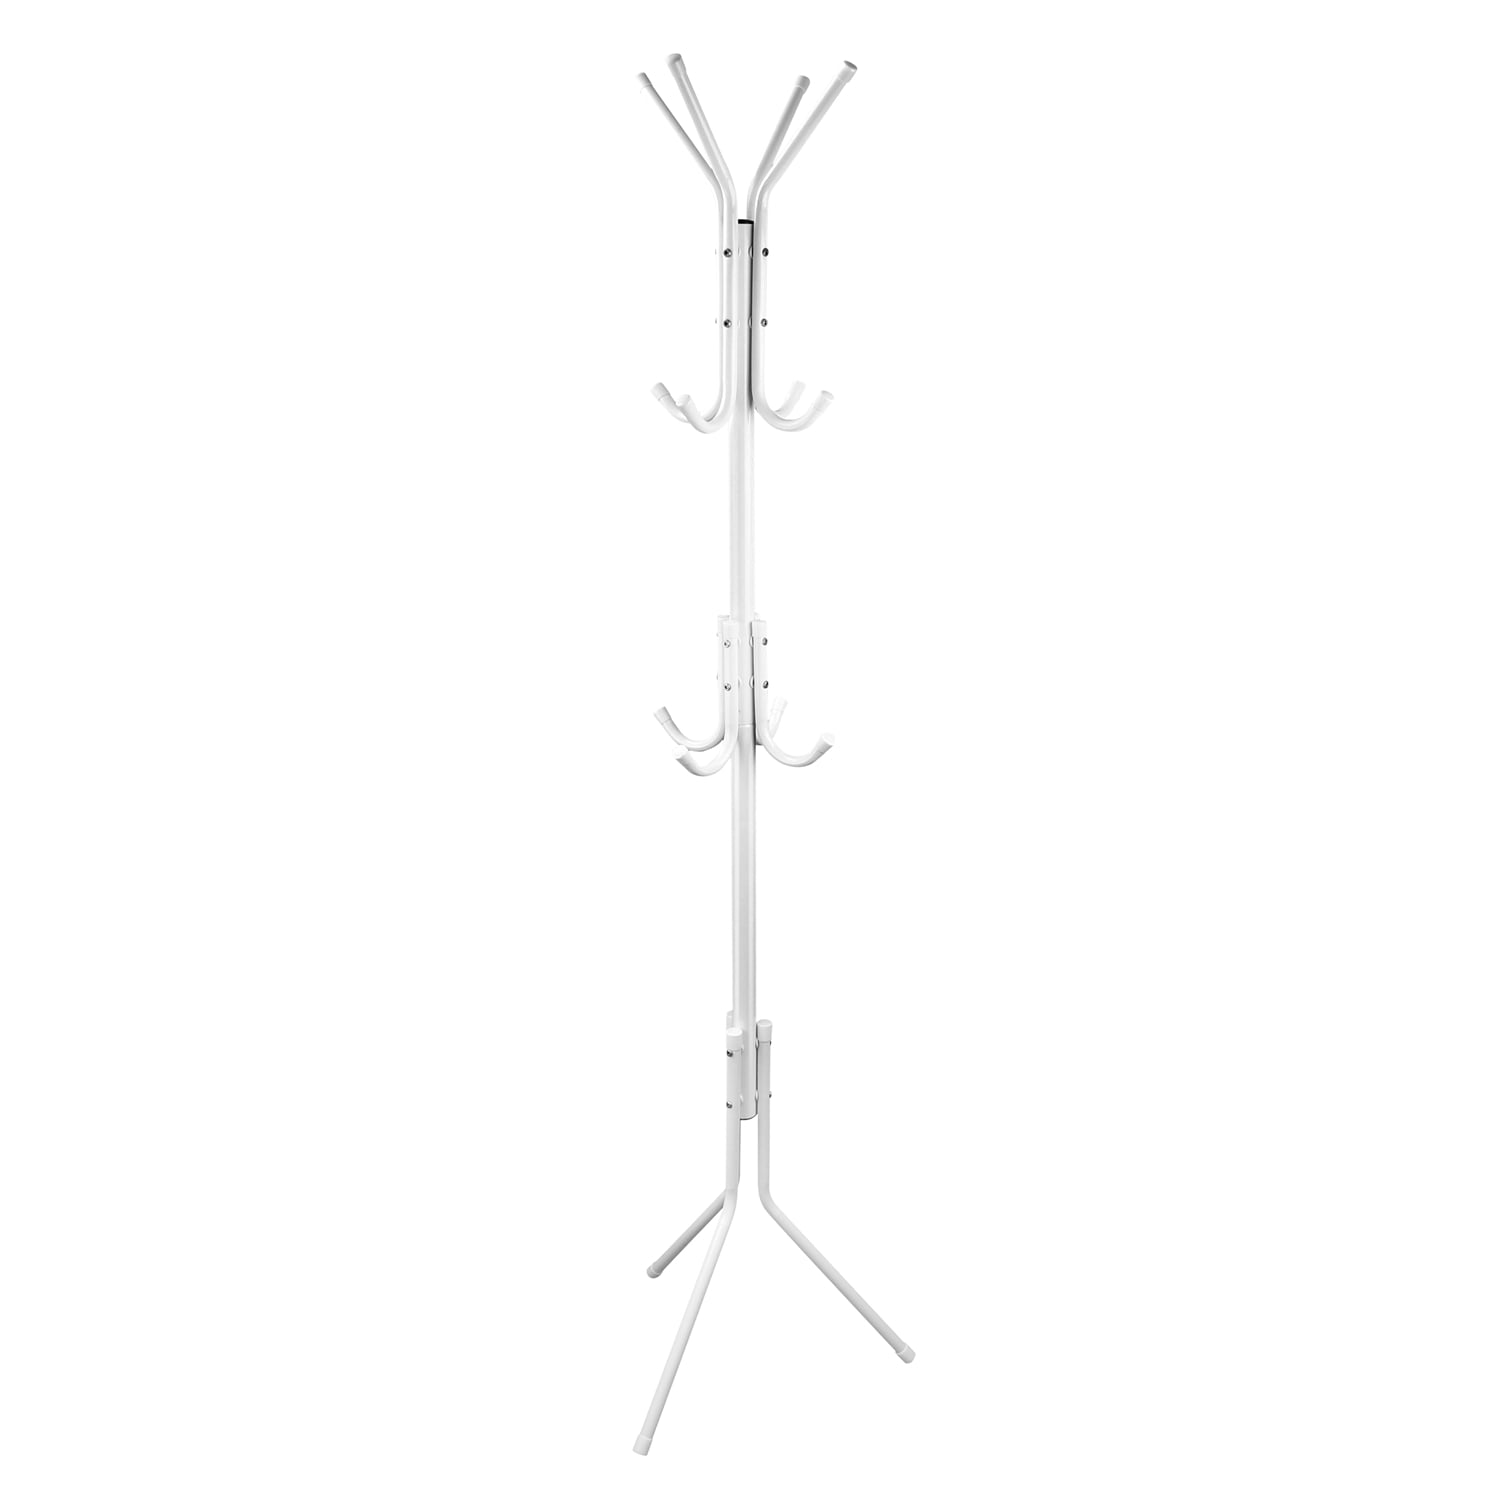 iMounTEK Iron Stand Coat Rack Tree Clothes Hanger with 8 Hooks 3 Tier ...